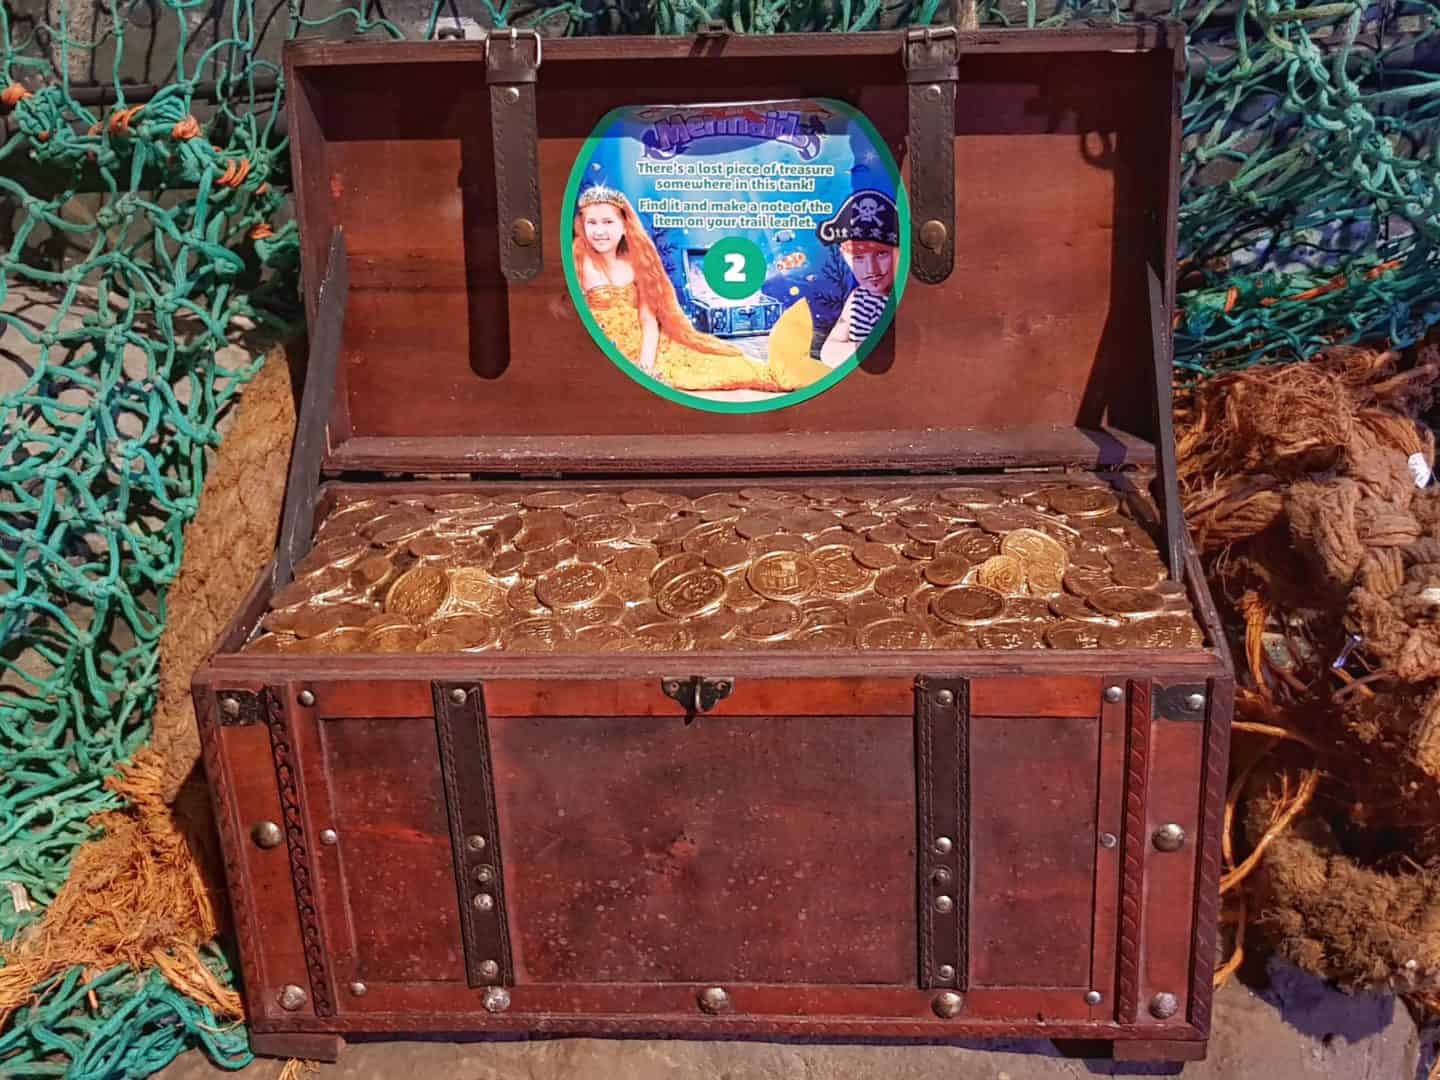 Treasure chest in a tank at the National Sea Life Centre